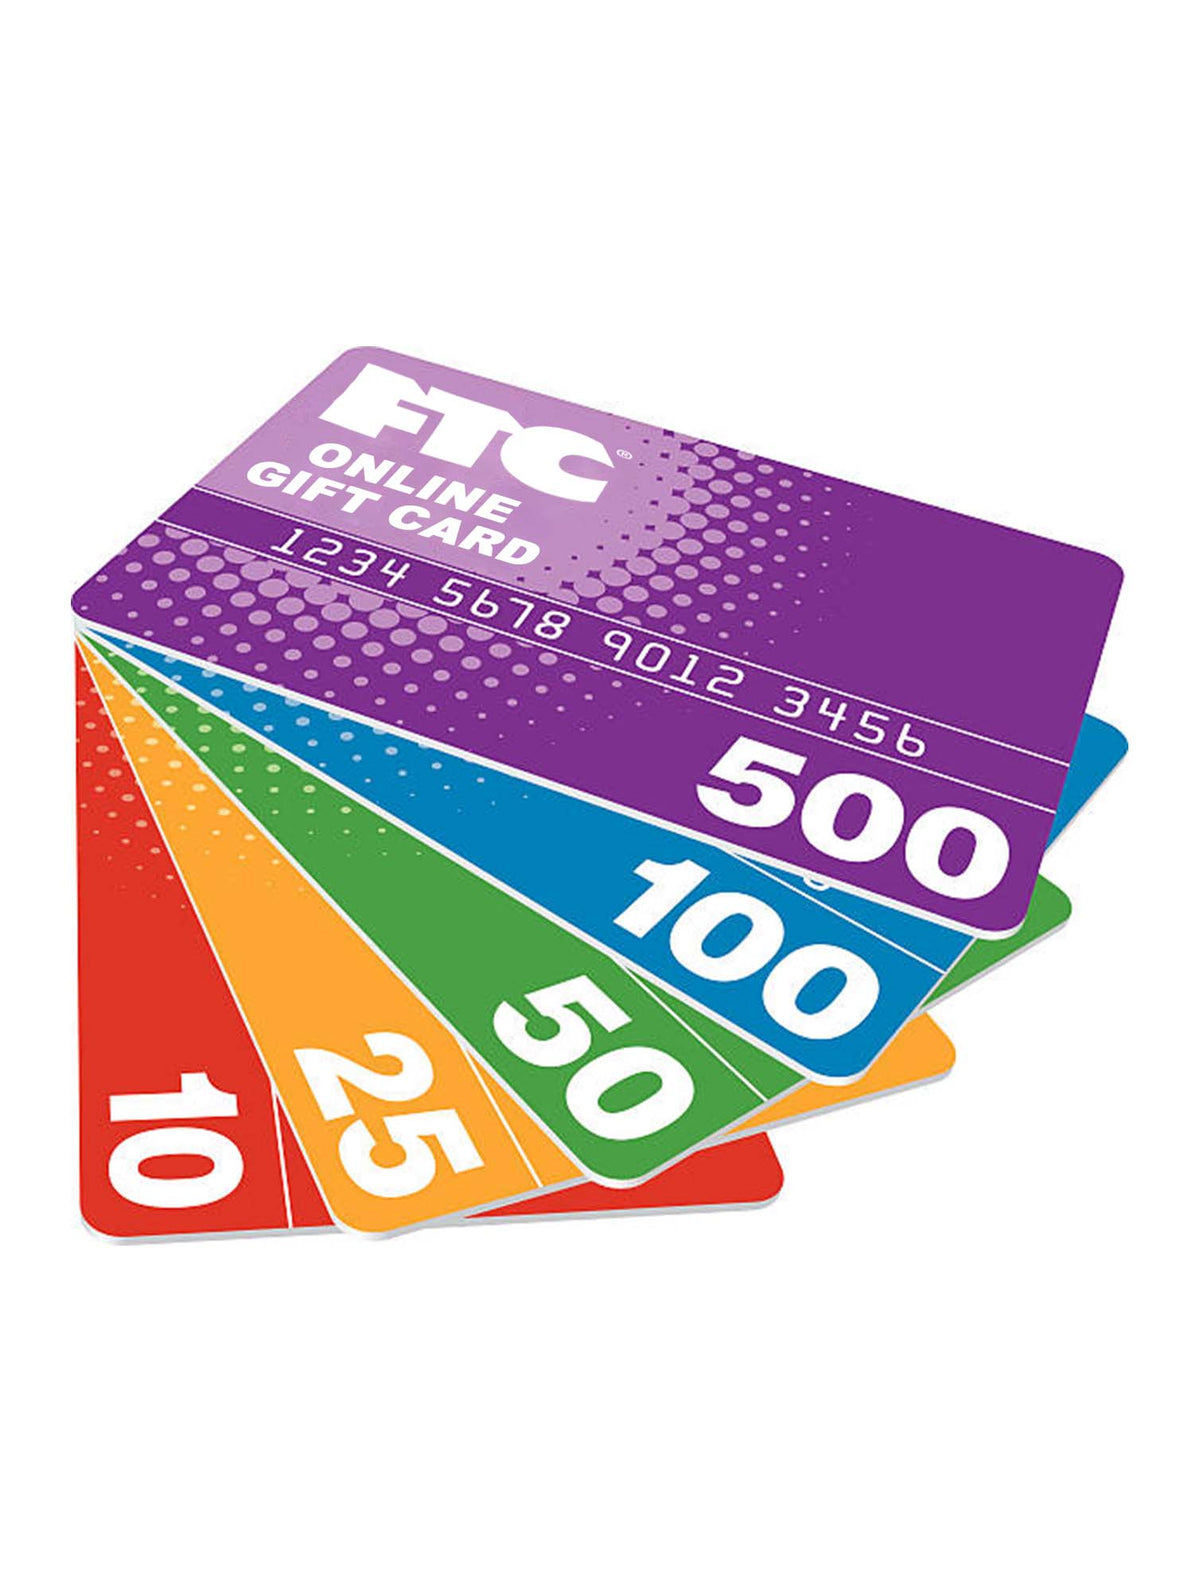 FTC ONLINE GIFT CARD